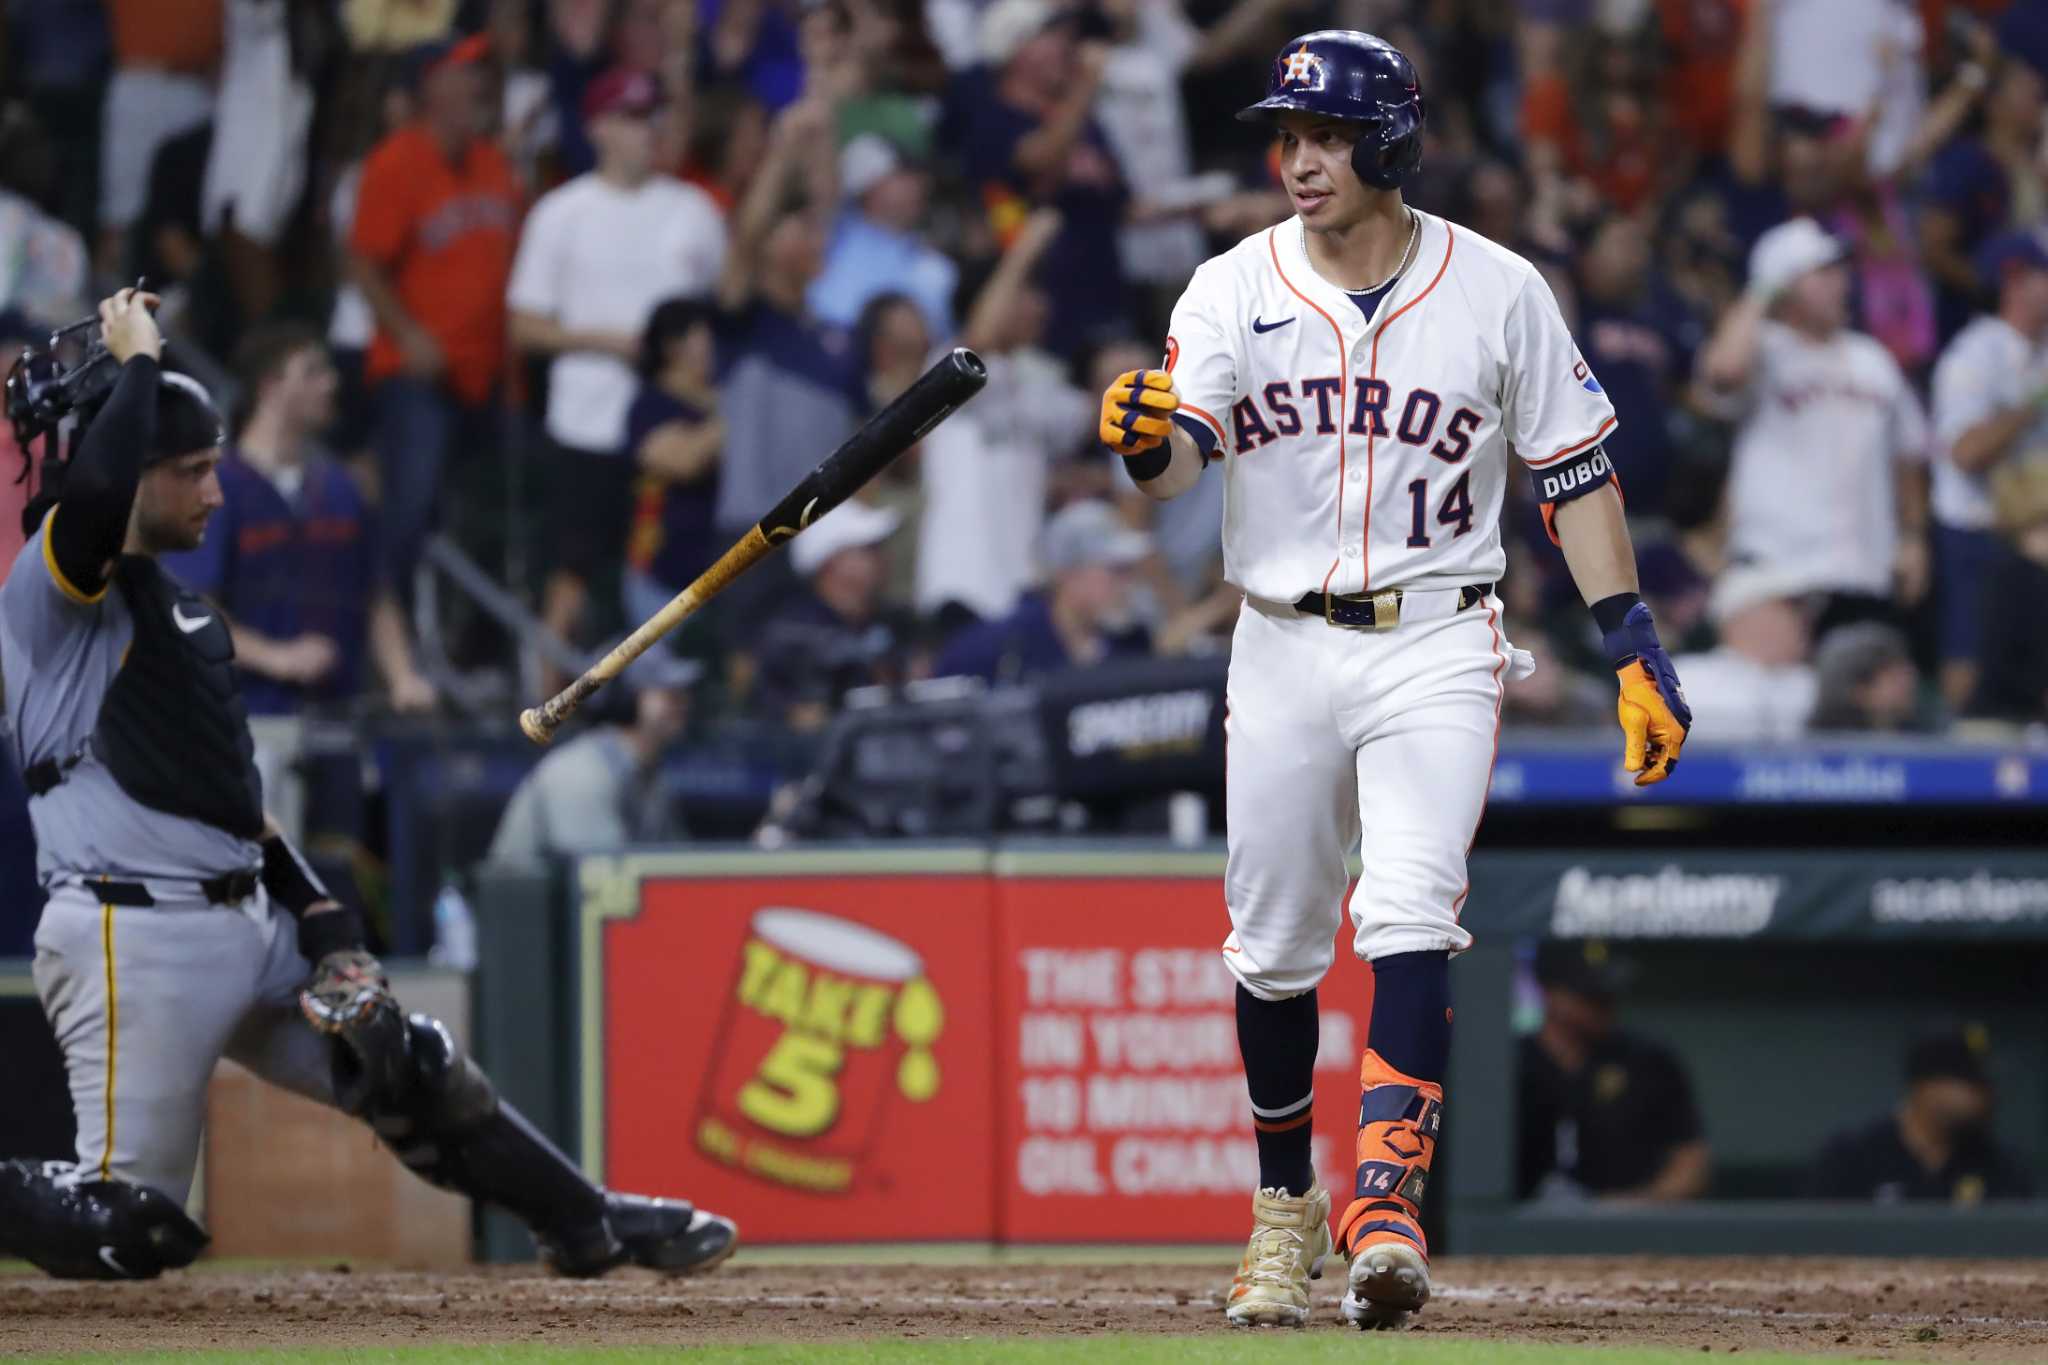 Valdez strikes out 10, Dubón hits a 2-run homer, and Astros come back for 5-4 win over Pirates